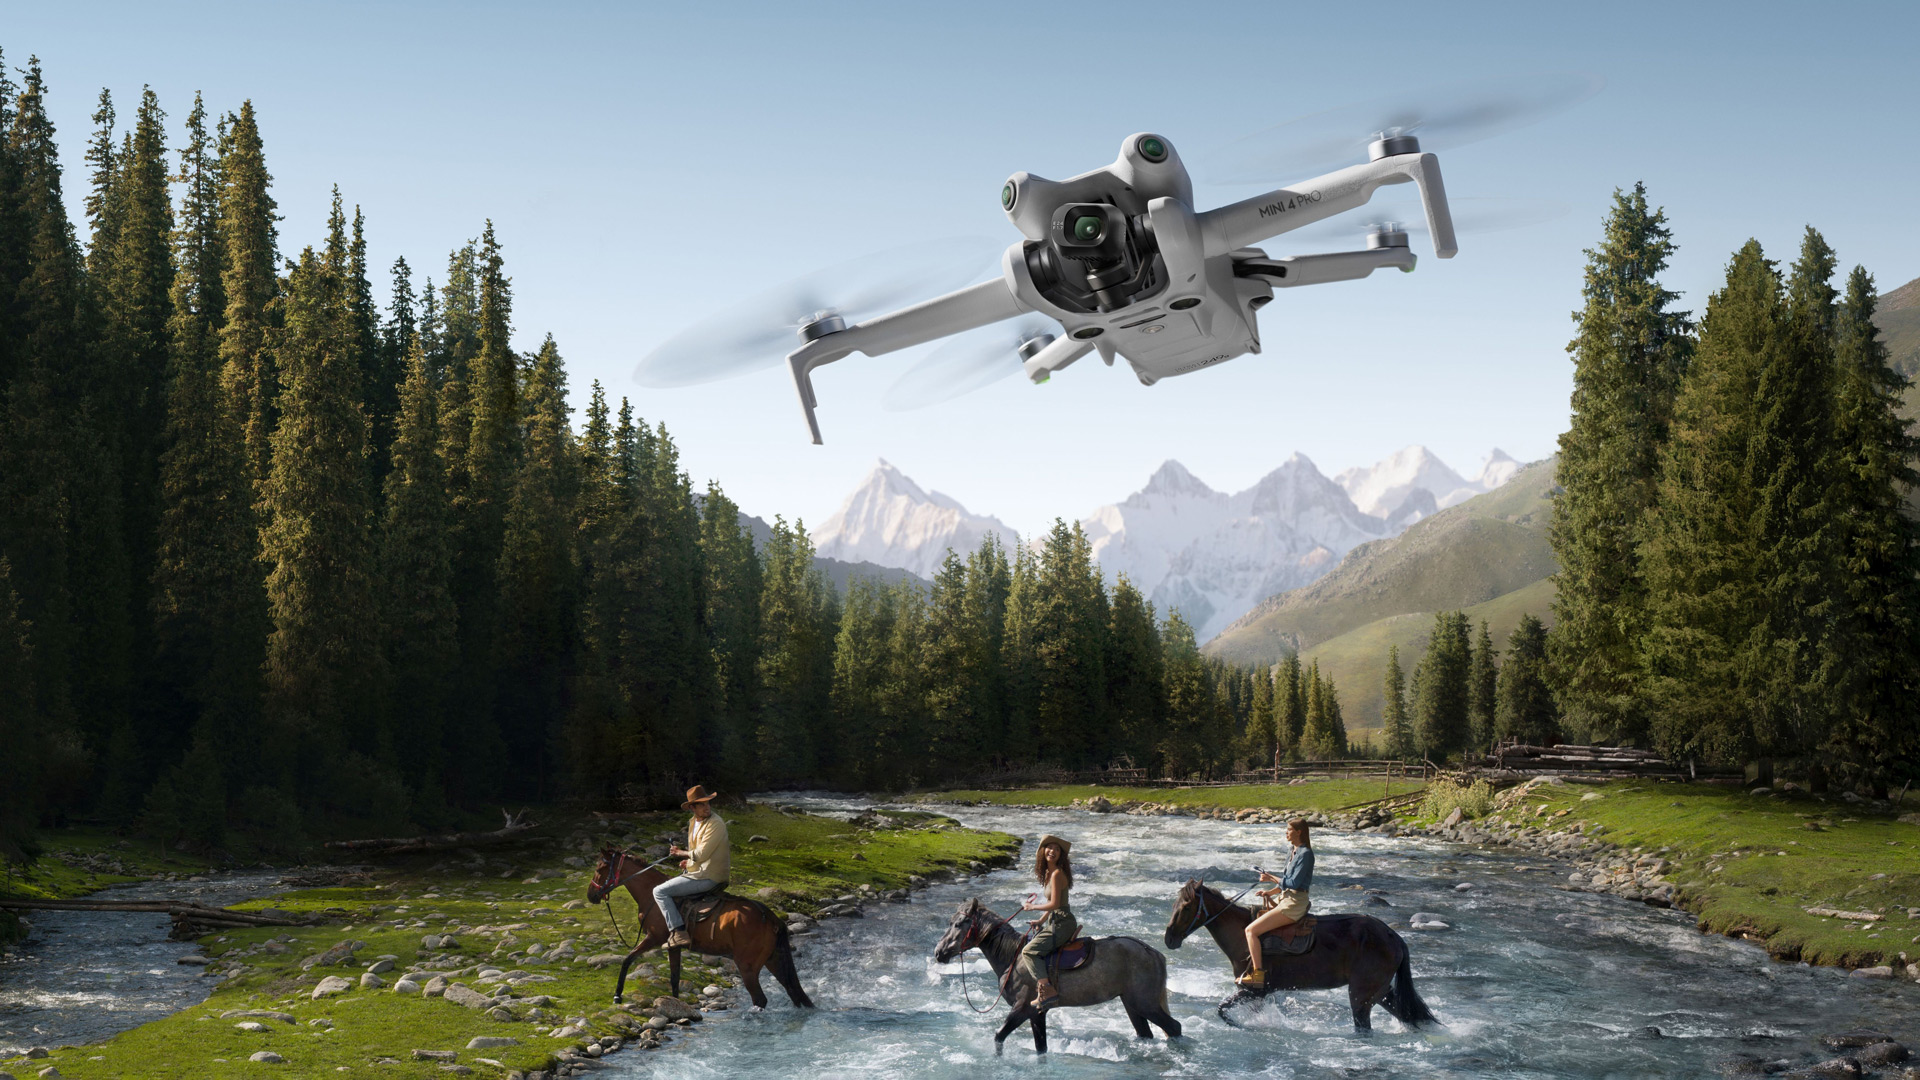 DJI Mini 4 Pro Drone Announced - Omnidirectional Obstacle Sensing